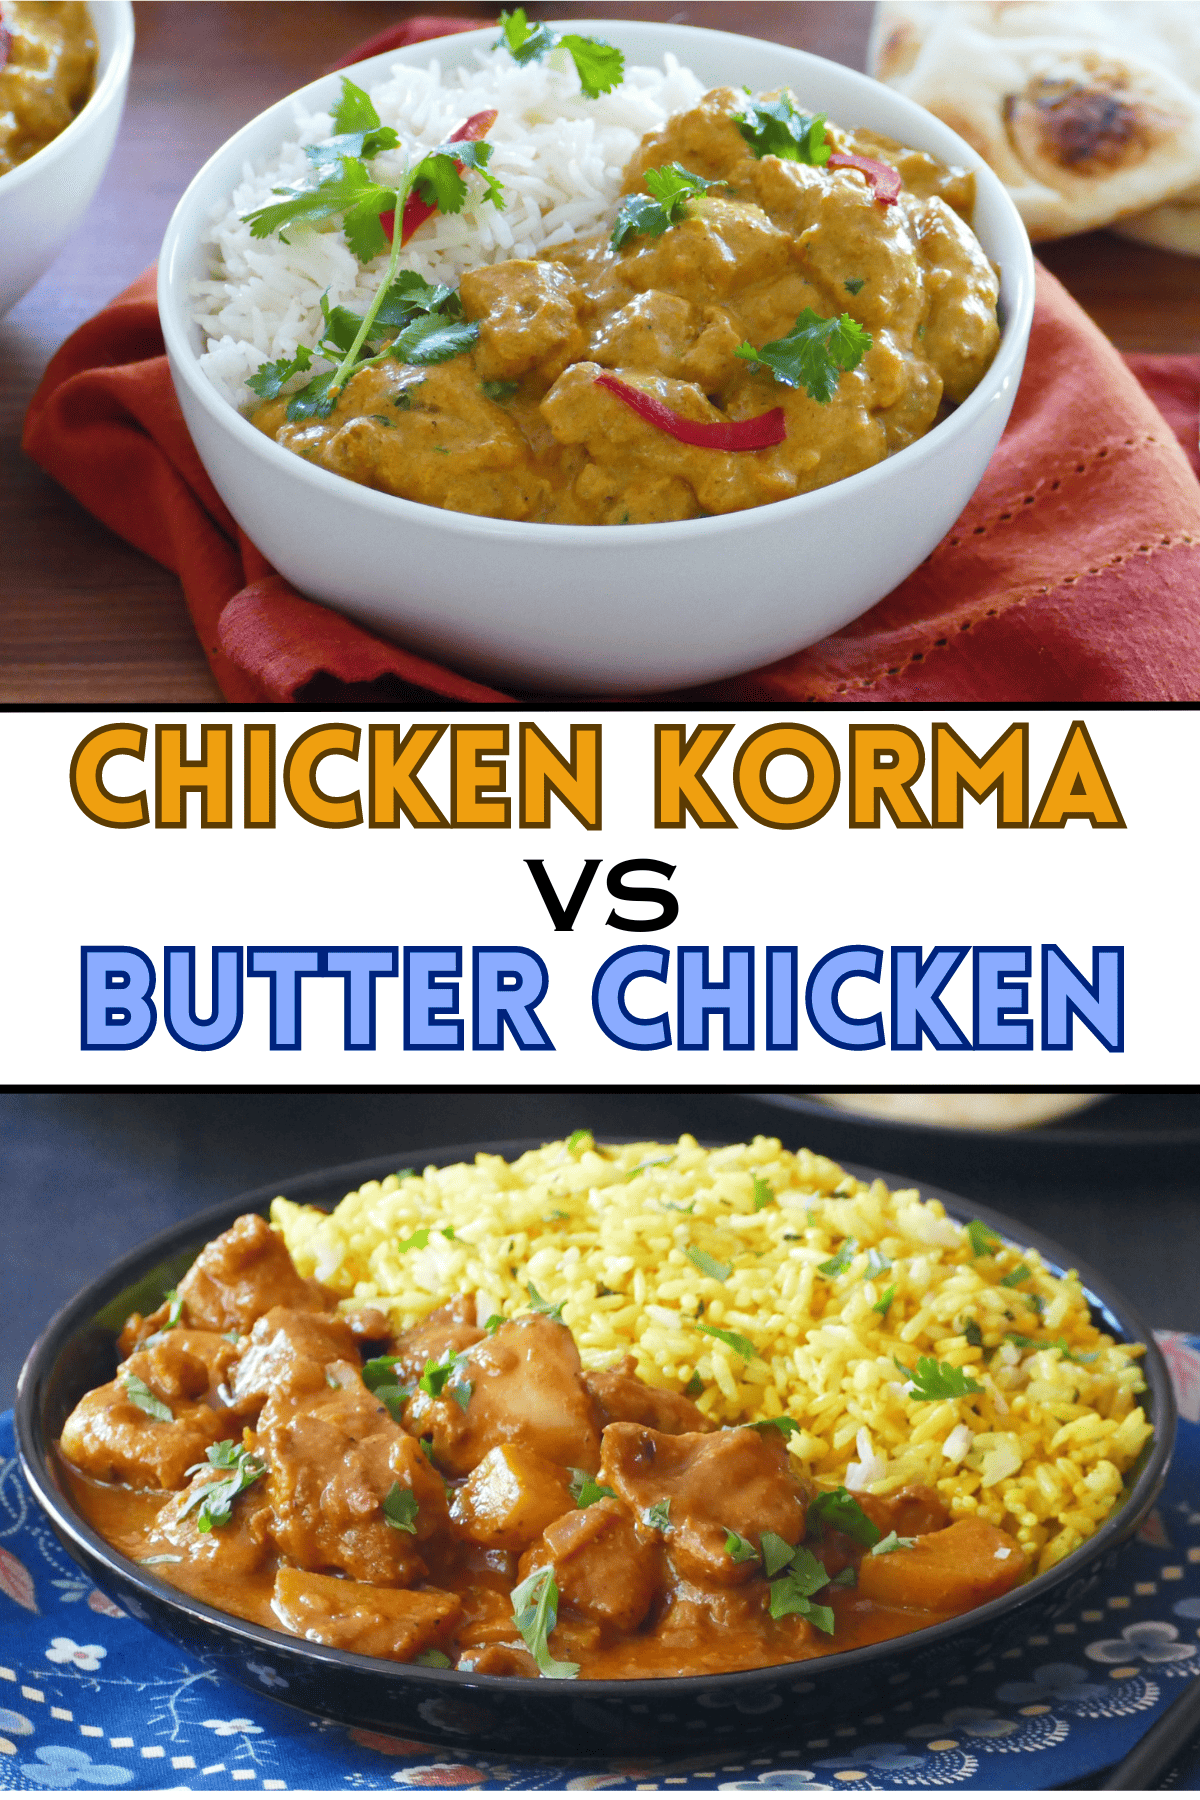 chicken korma vs butter chicken in bowls with rice and text 